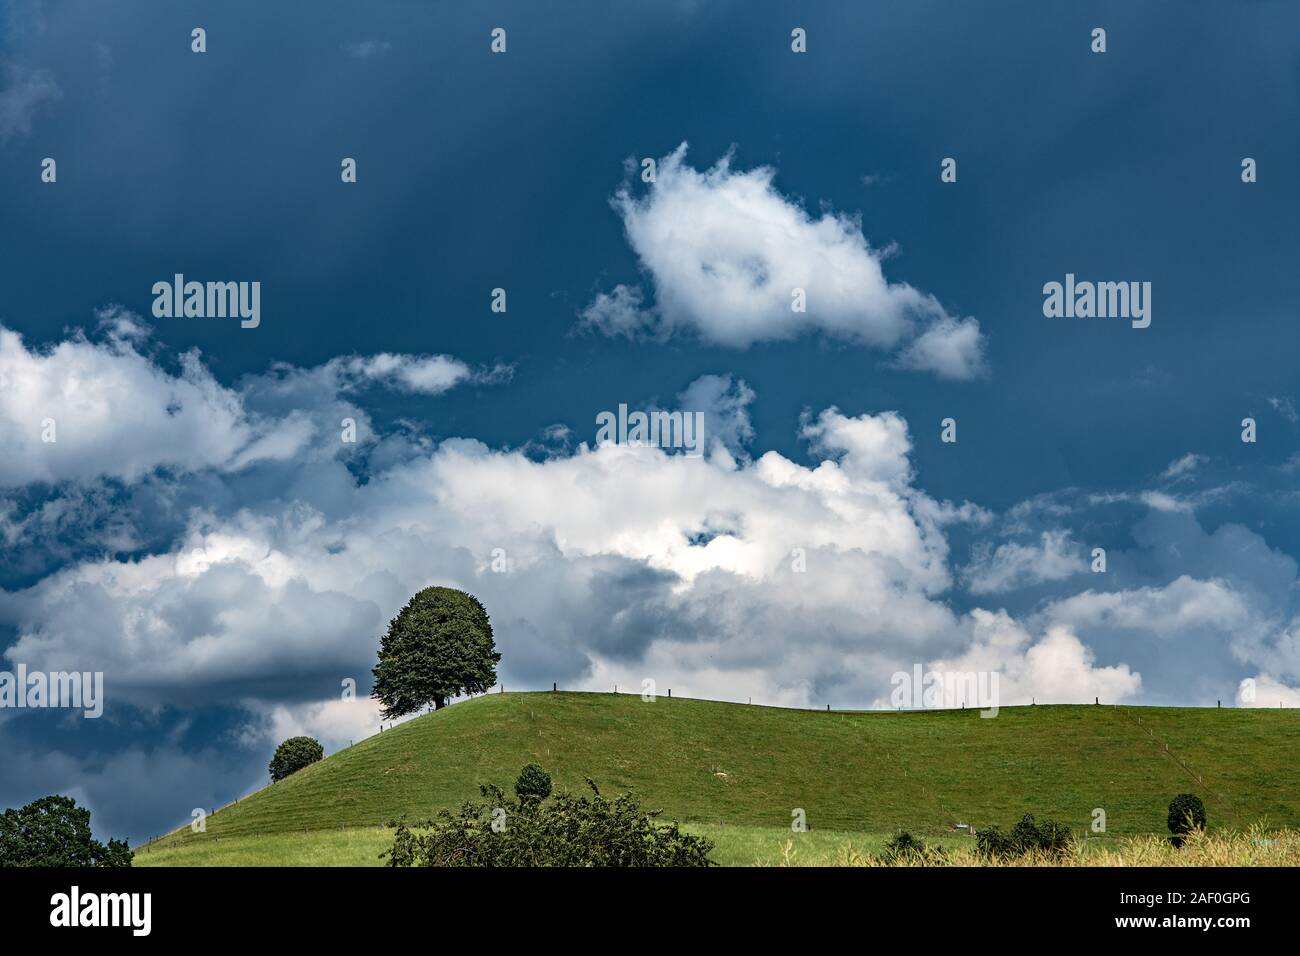 A landscape in the Lucerne back country. A gathering summer storm makes the sky dark and some white clouds stand out well. A linden tree stands on a g Stock Photo